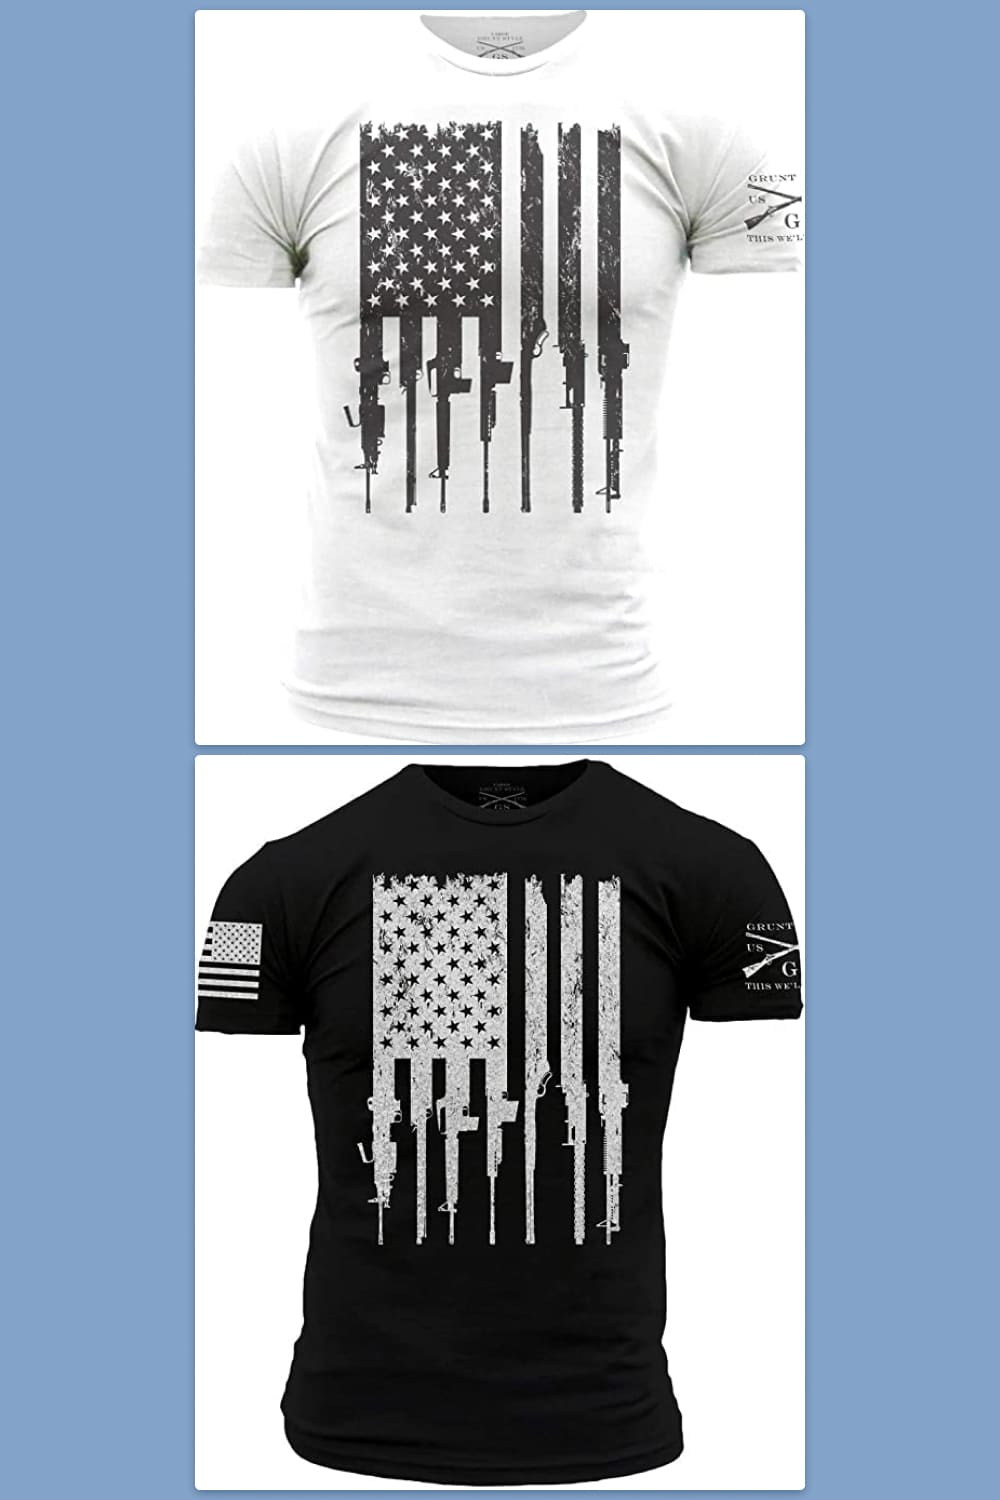 T-shirt with US flag with weapons instead of stripes.